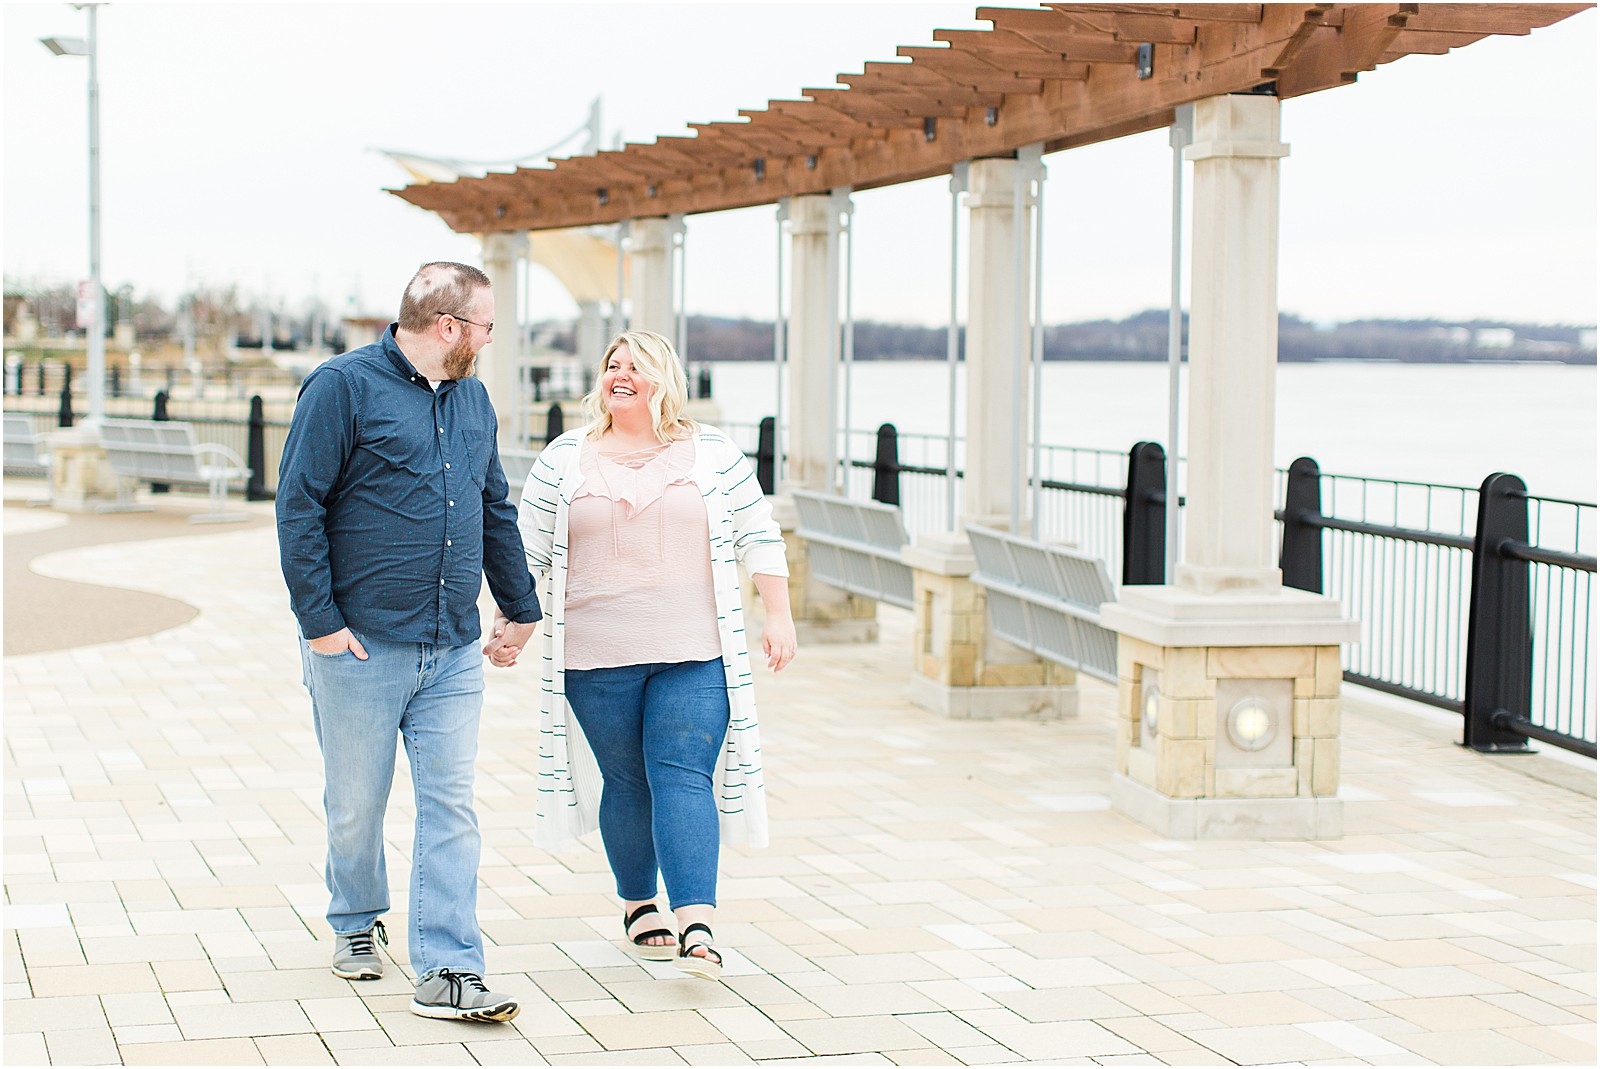 A Downtown Owensboro Engagement Session | Brittany and Neil | Engaged | | 0010.jpg